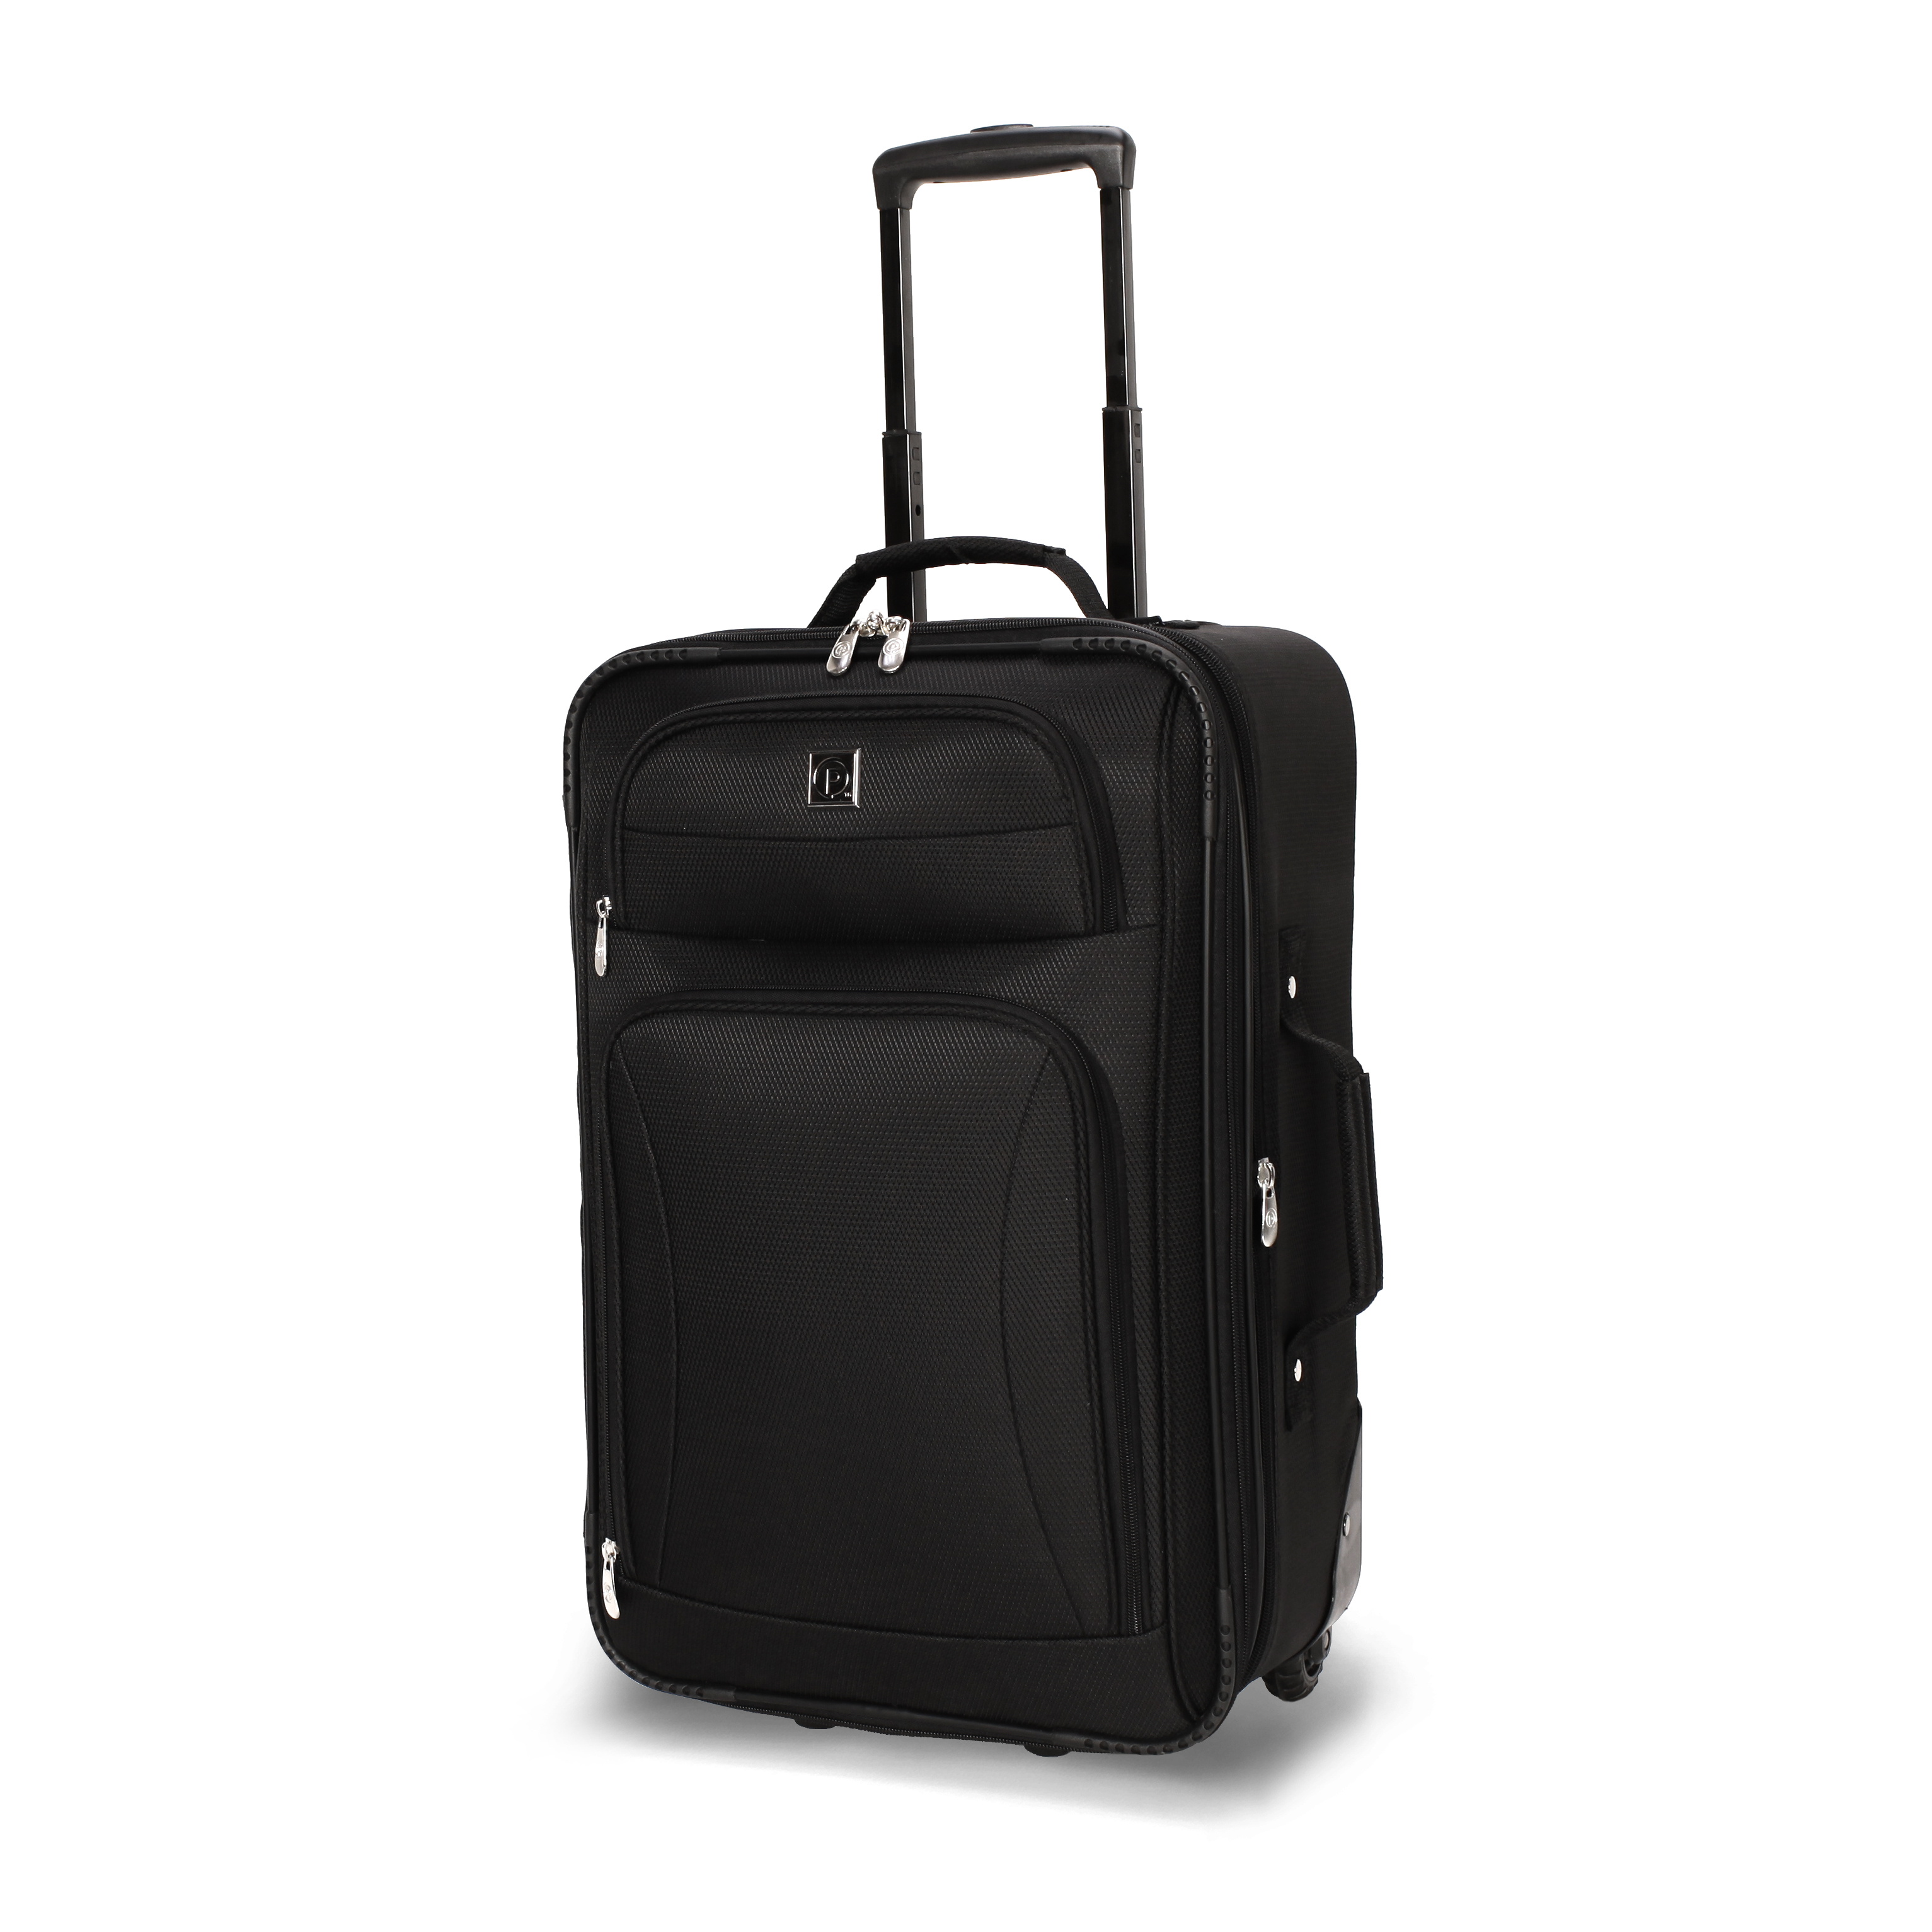 Protege 21" Regency Carry-on 2-Wheel Upright Luggage (Walmart Exclusive), Black - image 1 of 5